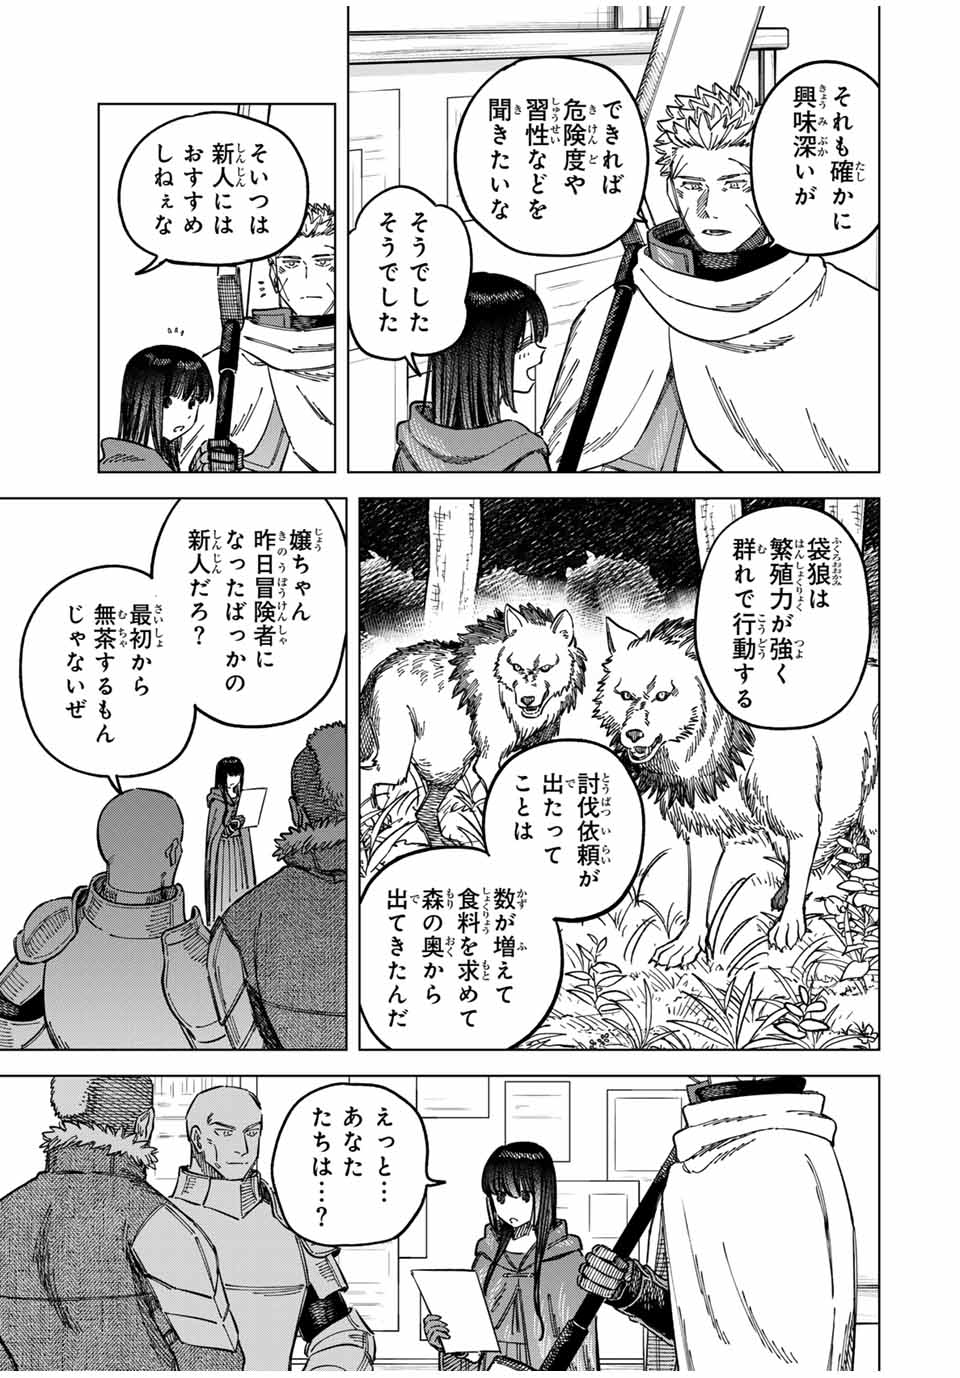 Witch and Mercenary 魔女と傭兵 第5.1話 - Page 13